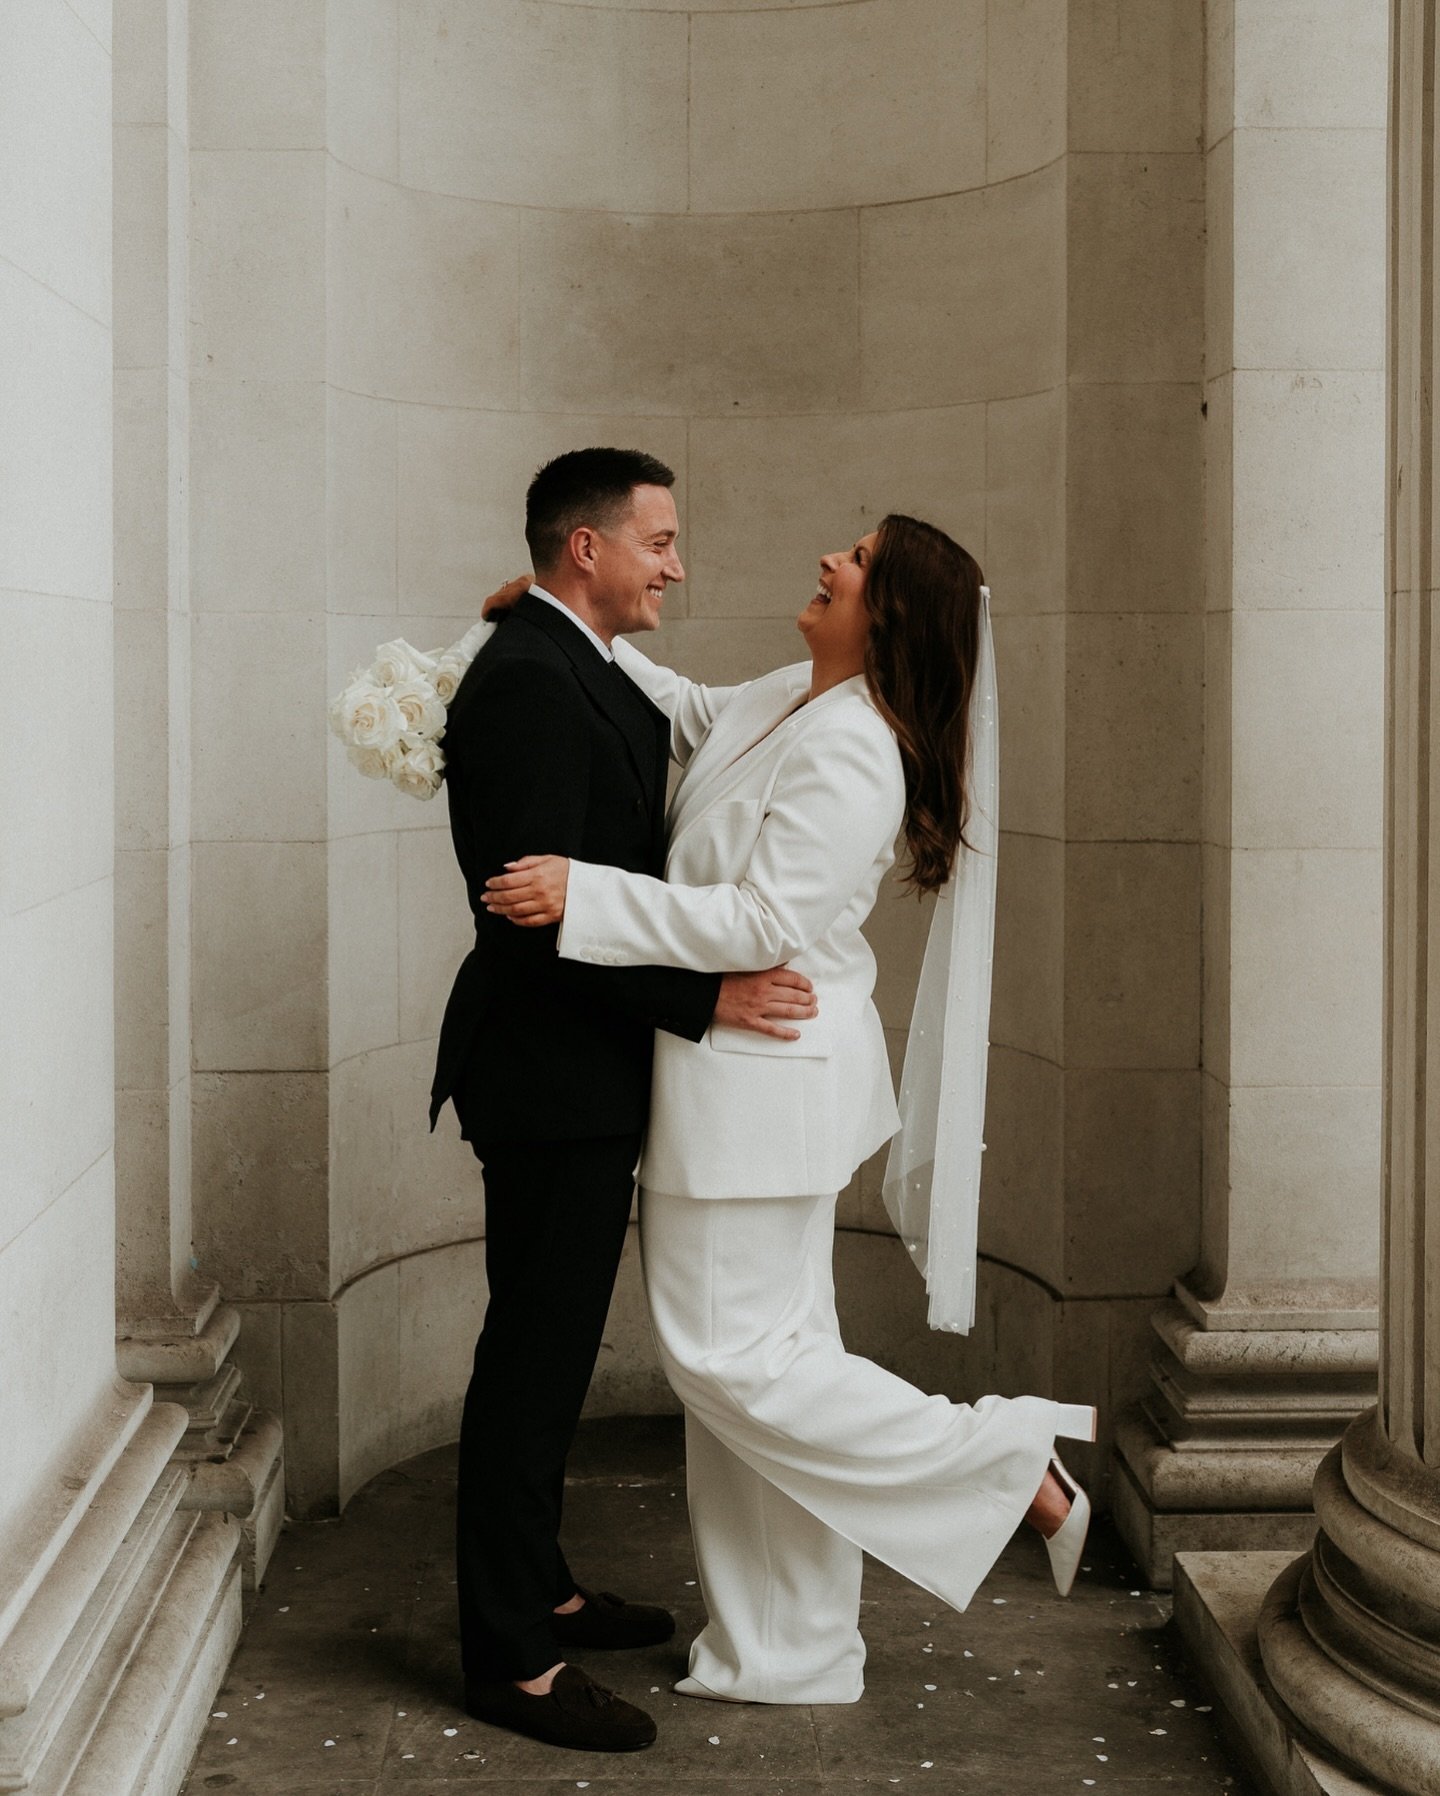 Last week I had the honour of capturing P&amp;B&rsquo;s elopement at Marylebone Town hall in London. Being part of the secret and being a witness to their marriage was so amazingly special. Stylish, elegant and &uuml;ber cool. These two got us firmly